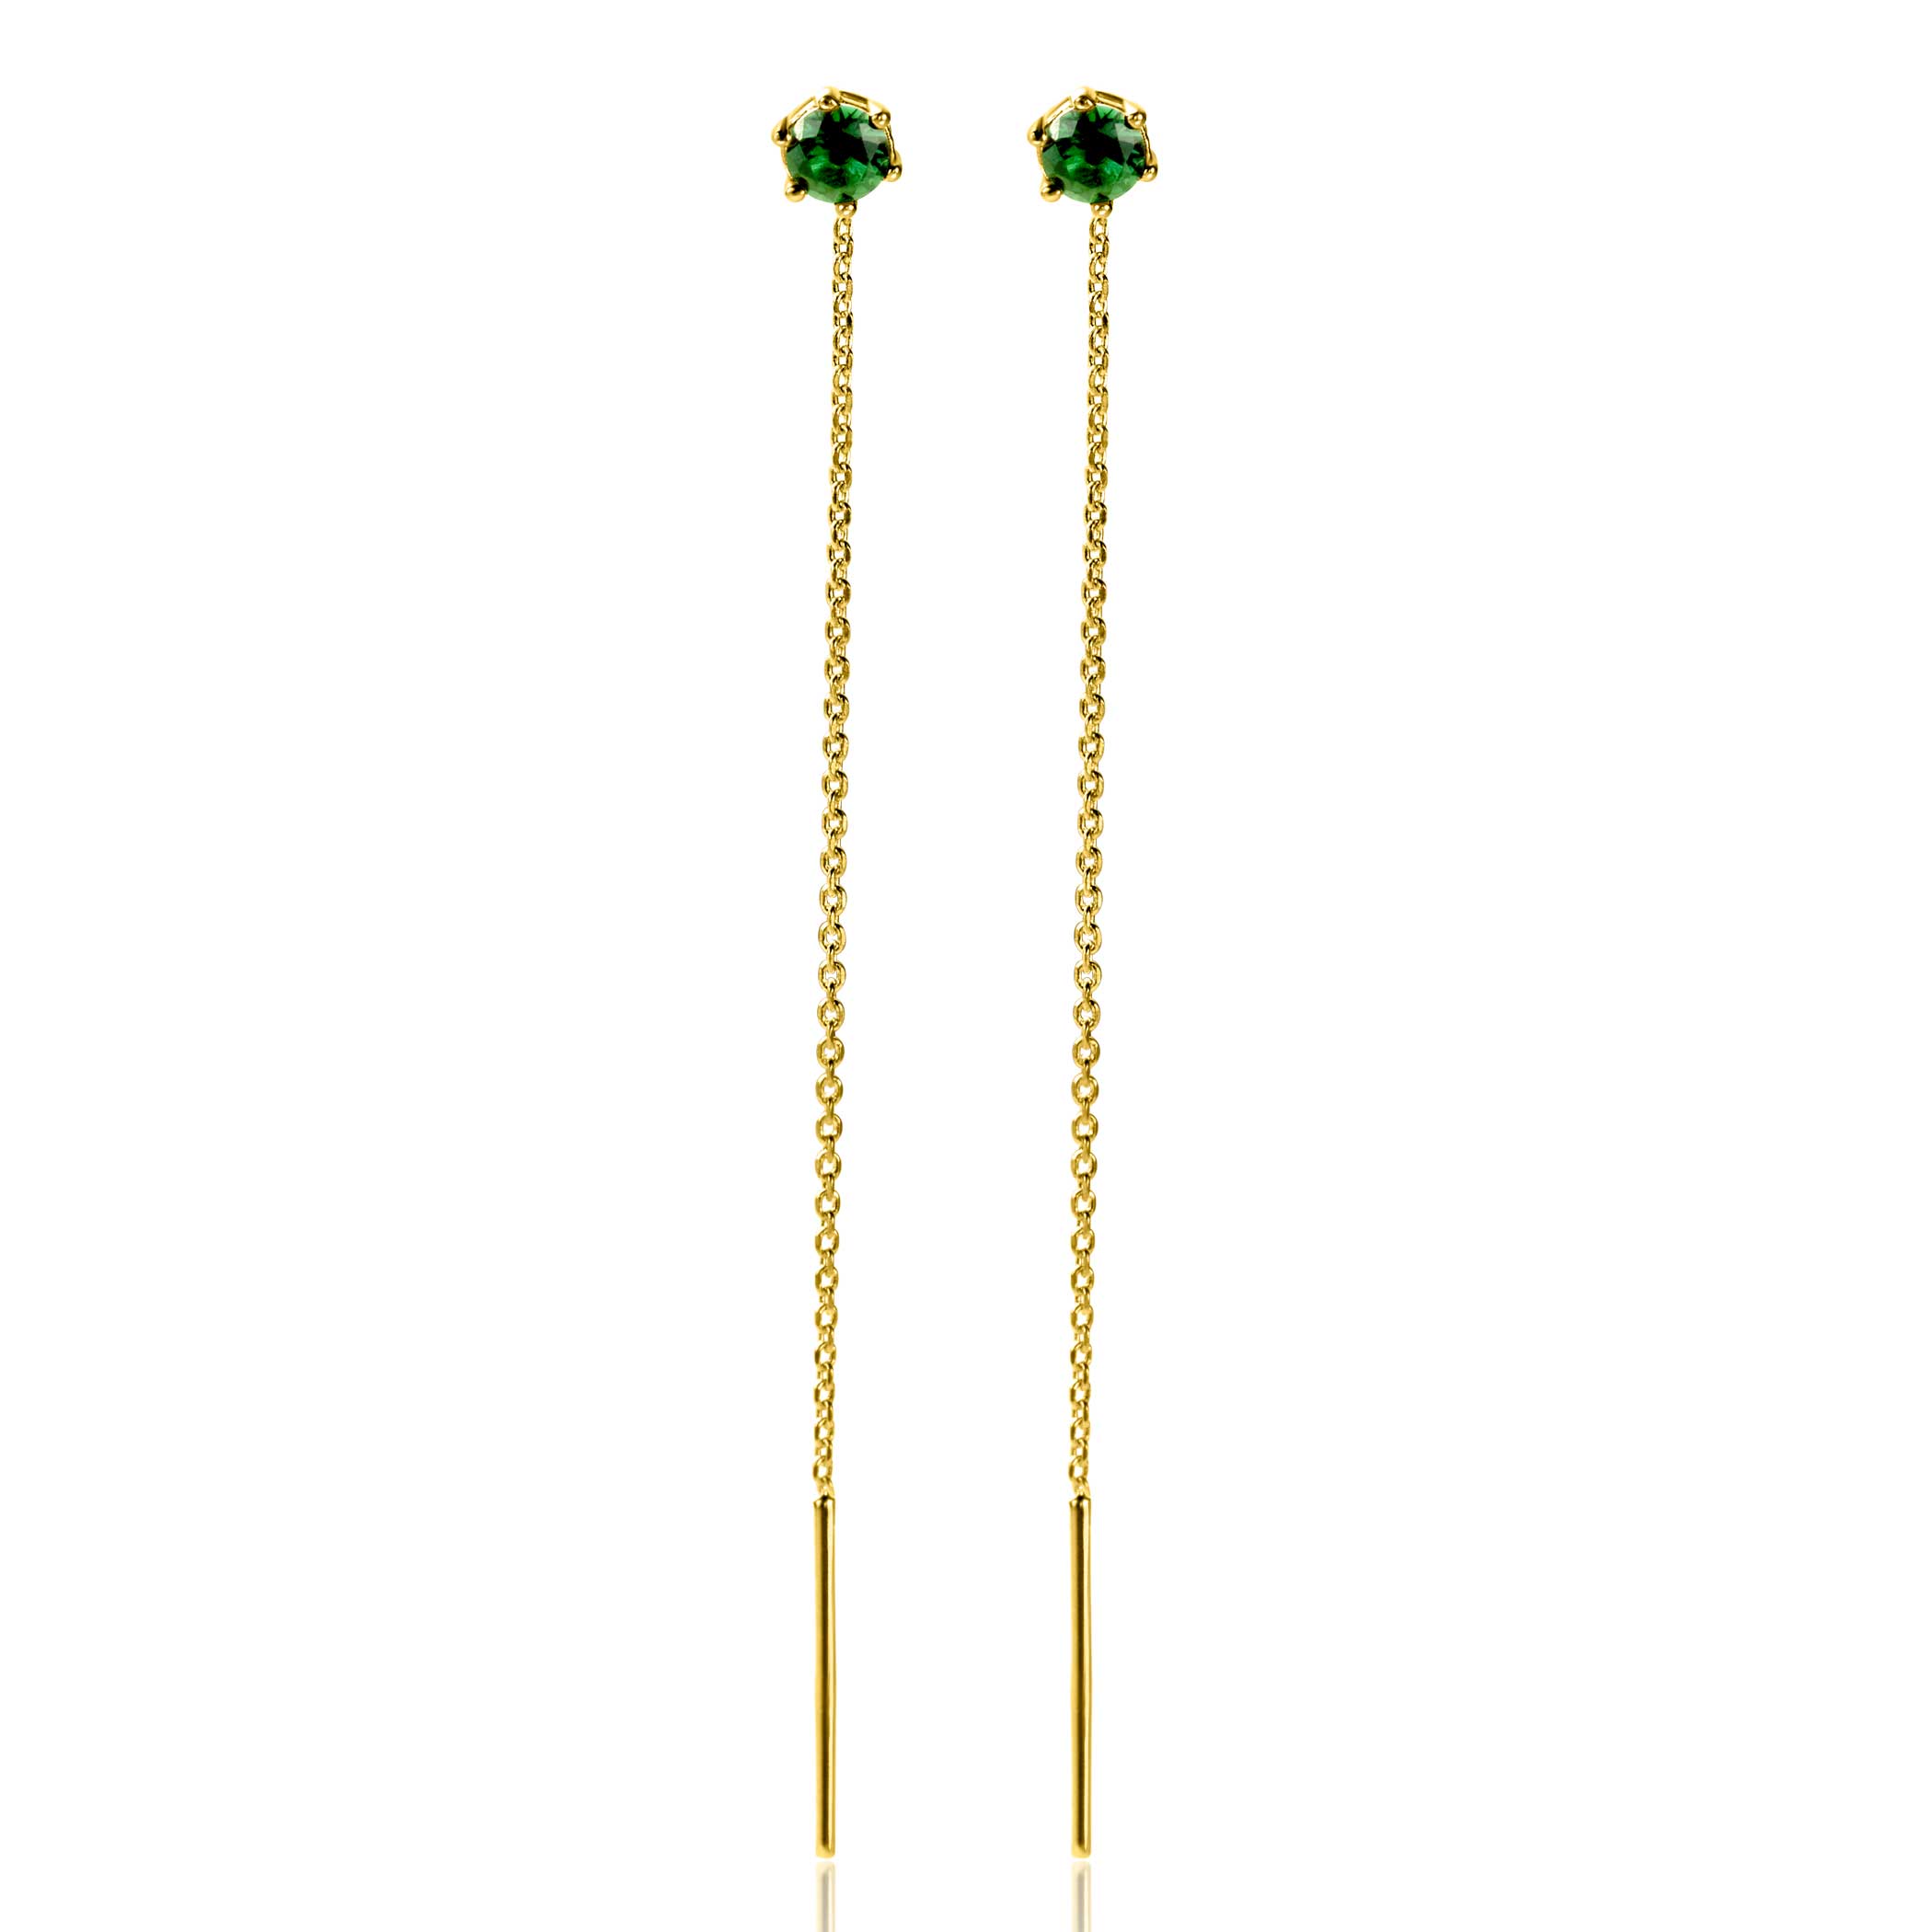 80mm ZINZI gold plated silver threader earrings with 5mm green stone chaton setting and graceful chain ZIO2576GG
